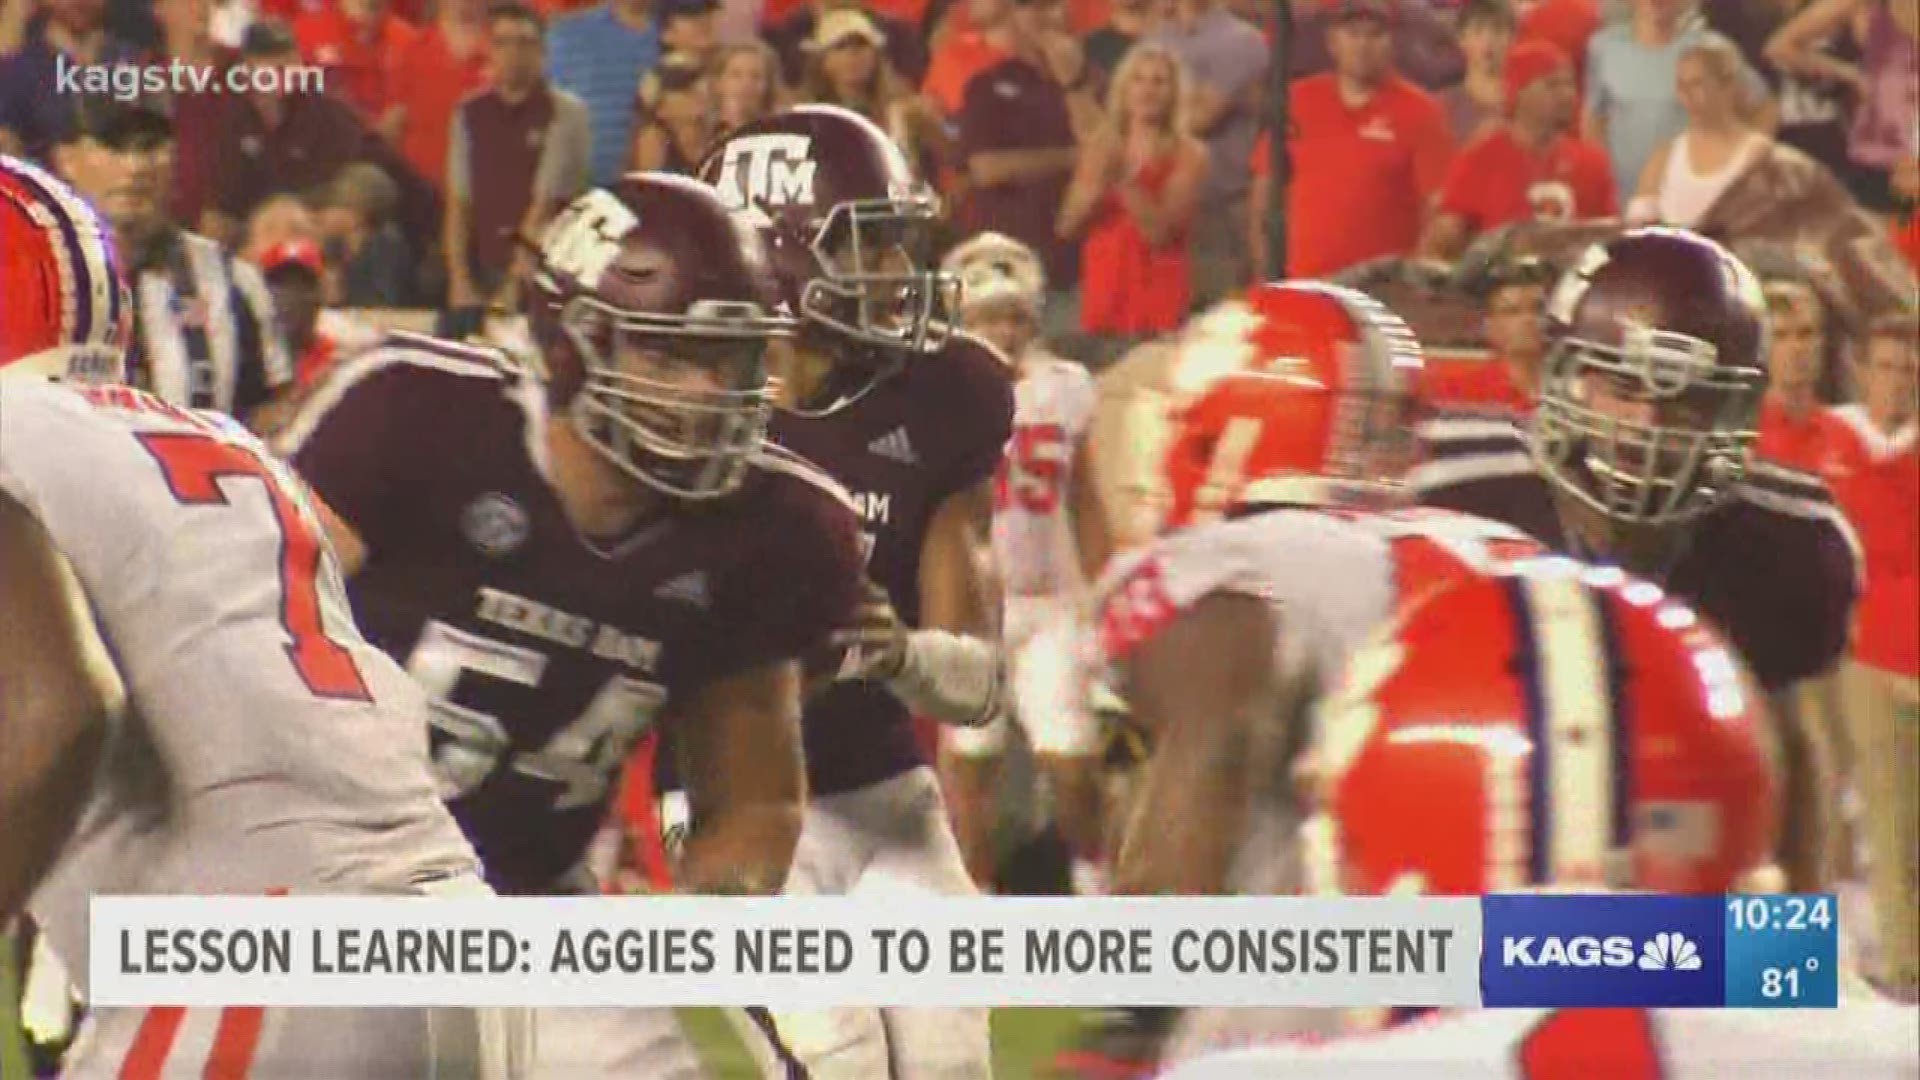 After playing and losing to the top two teams in the nation, the Aggies have learned they can hang tough but must be more consistent.